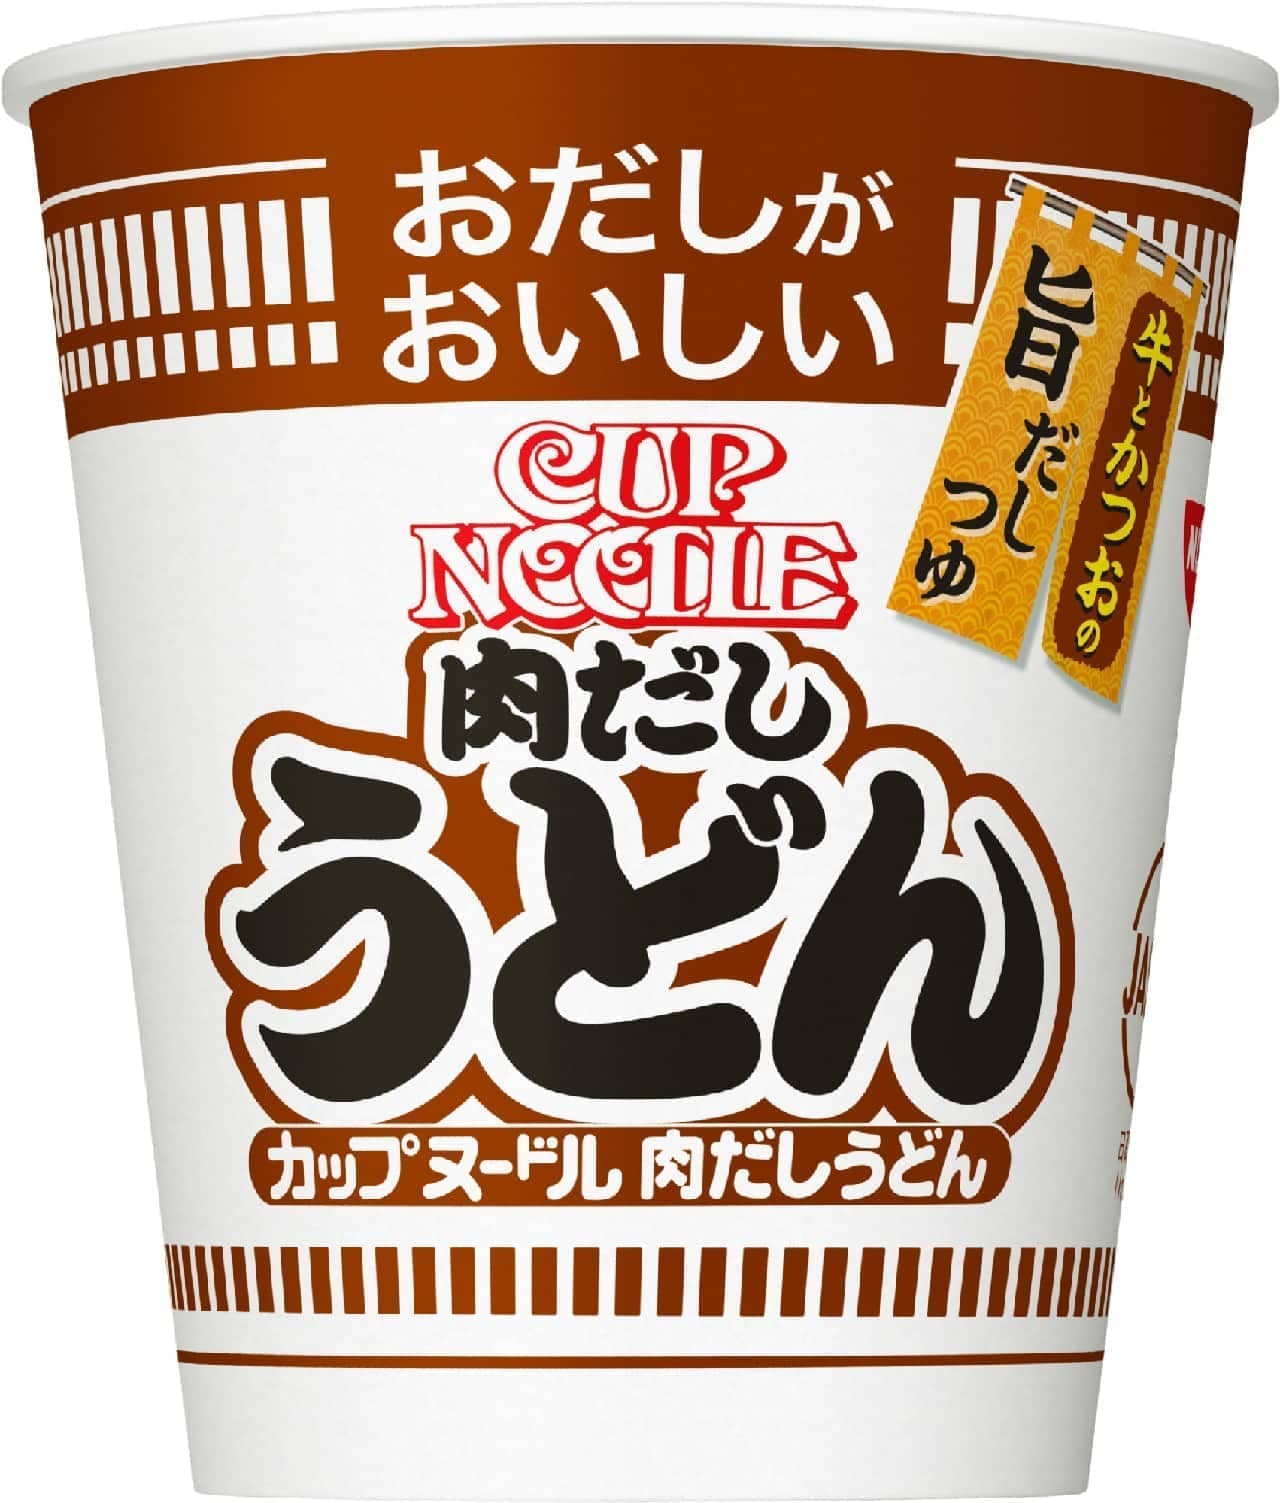 Nissin Foods "Cup Noodle Meat Dashi Udon with Delicious Dashi"